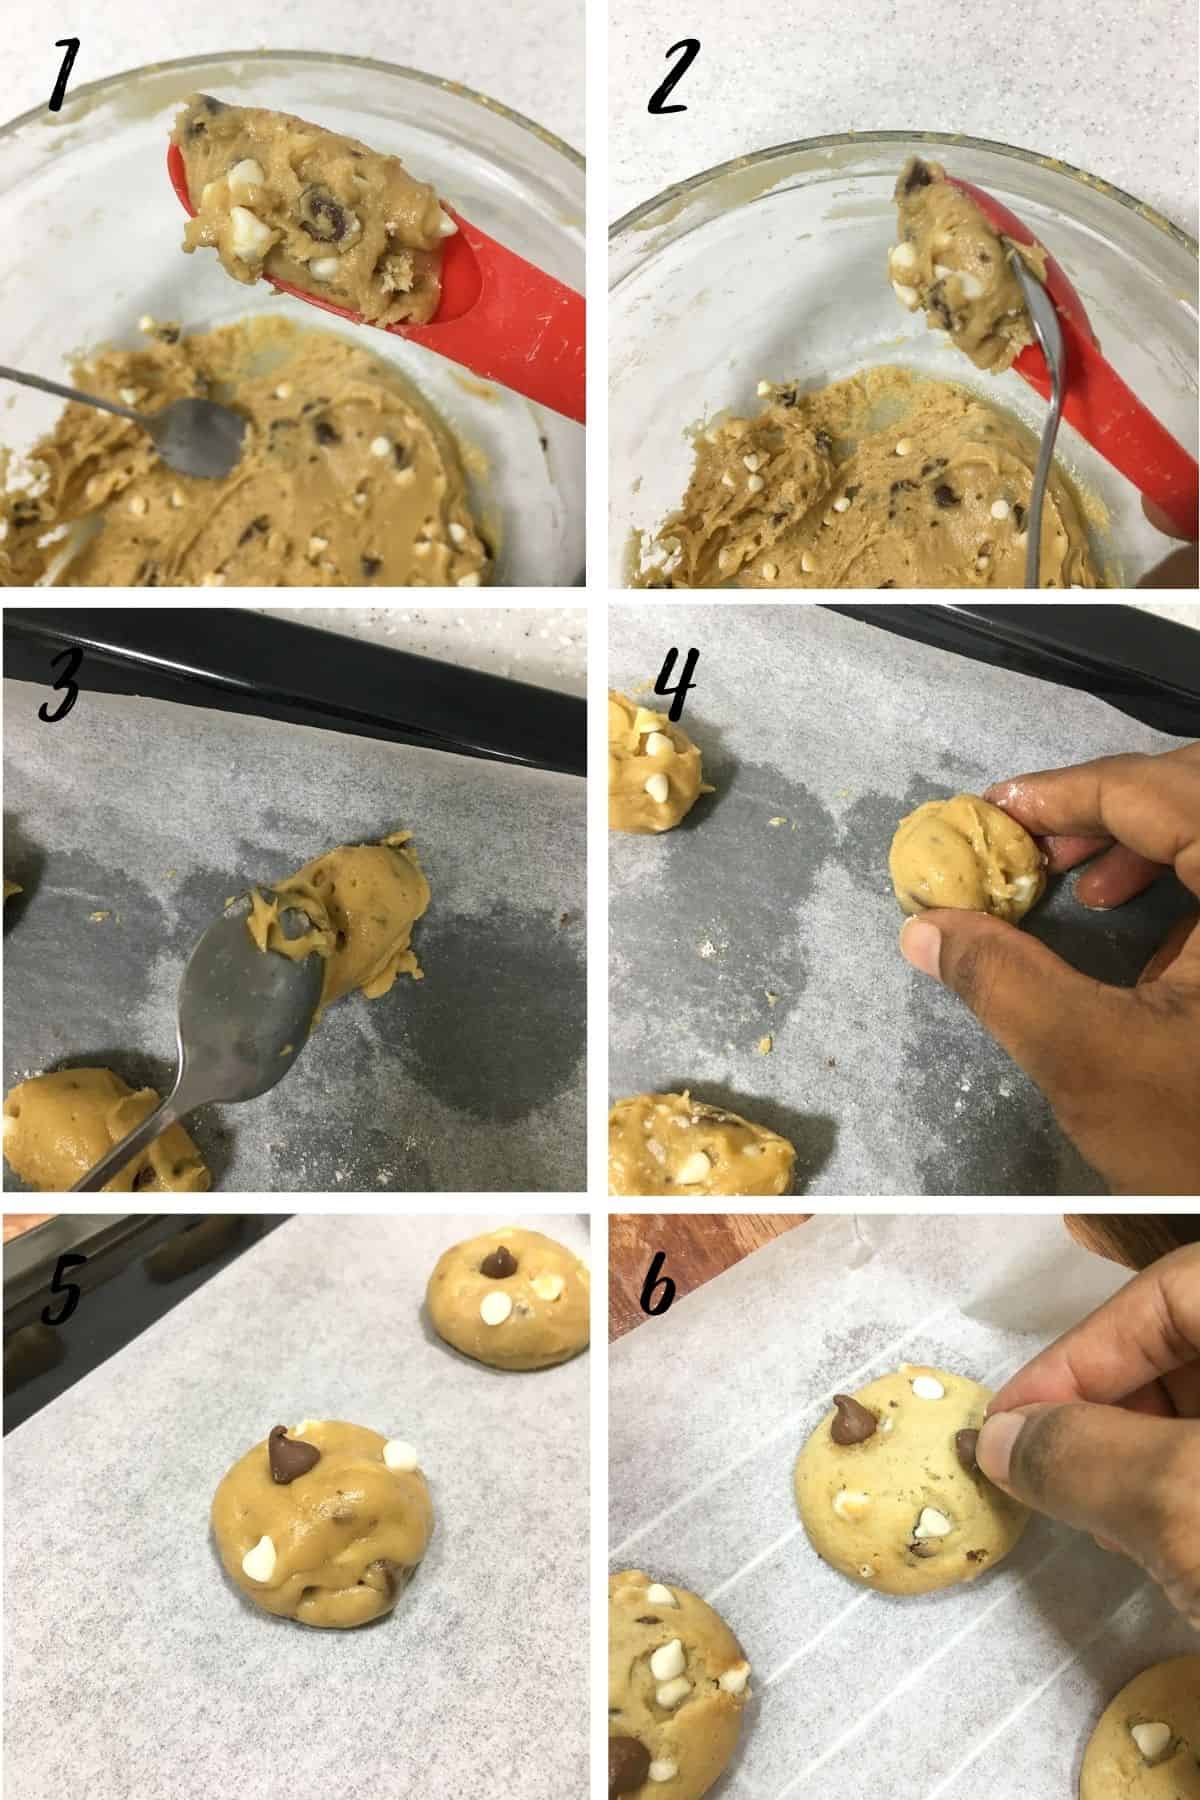 A poster of 6 images showing how to shape dough.